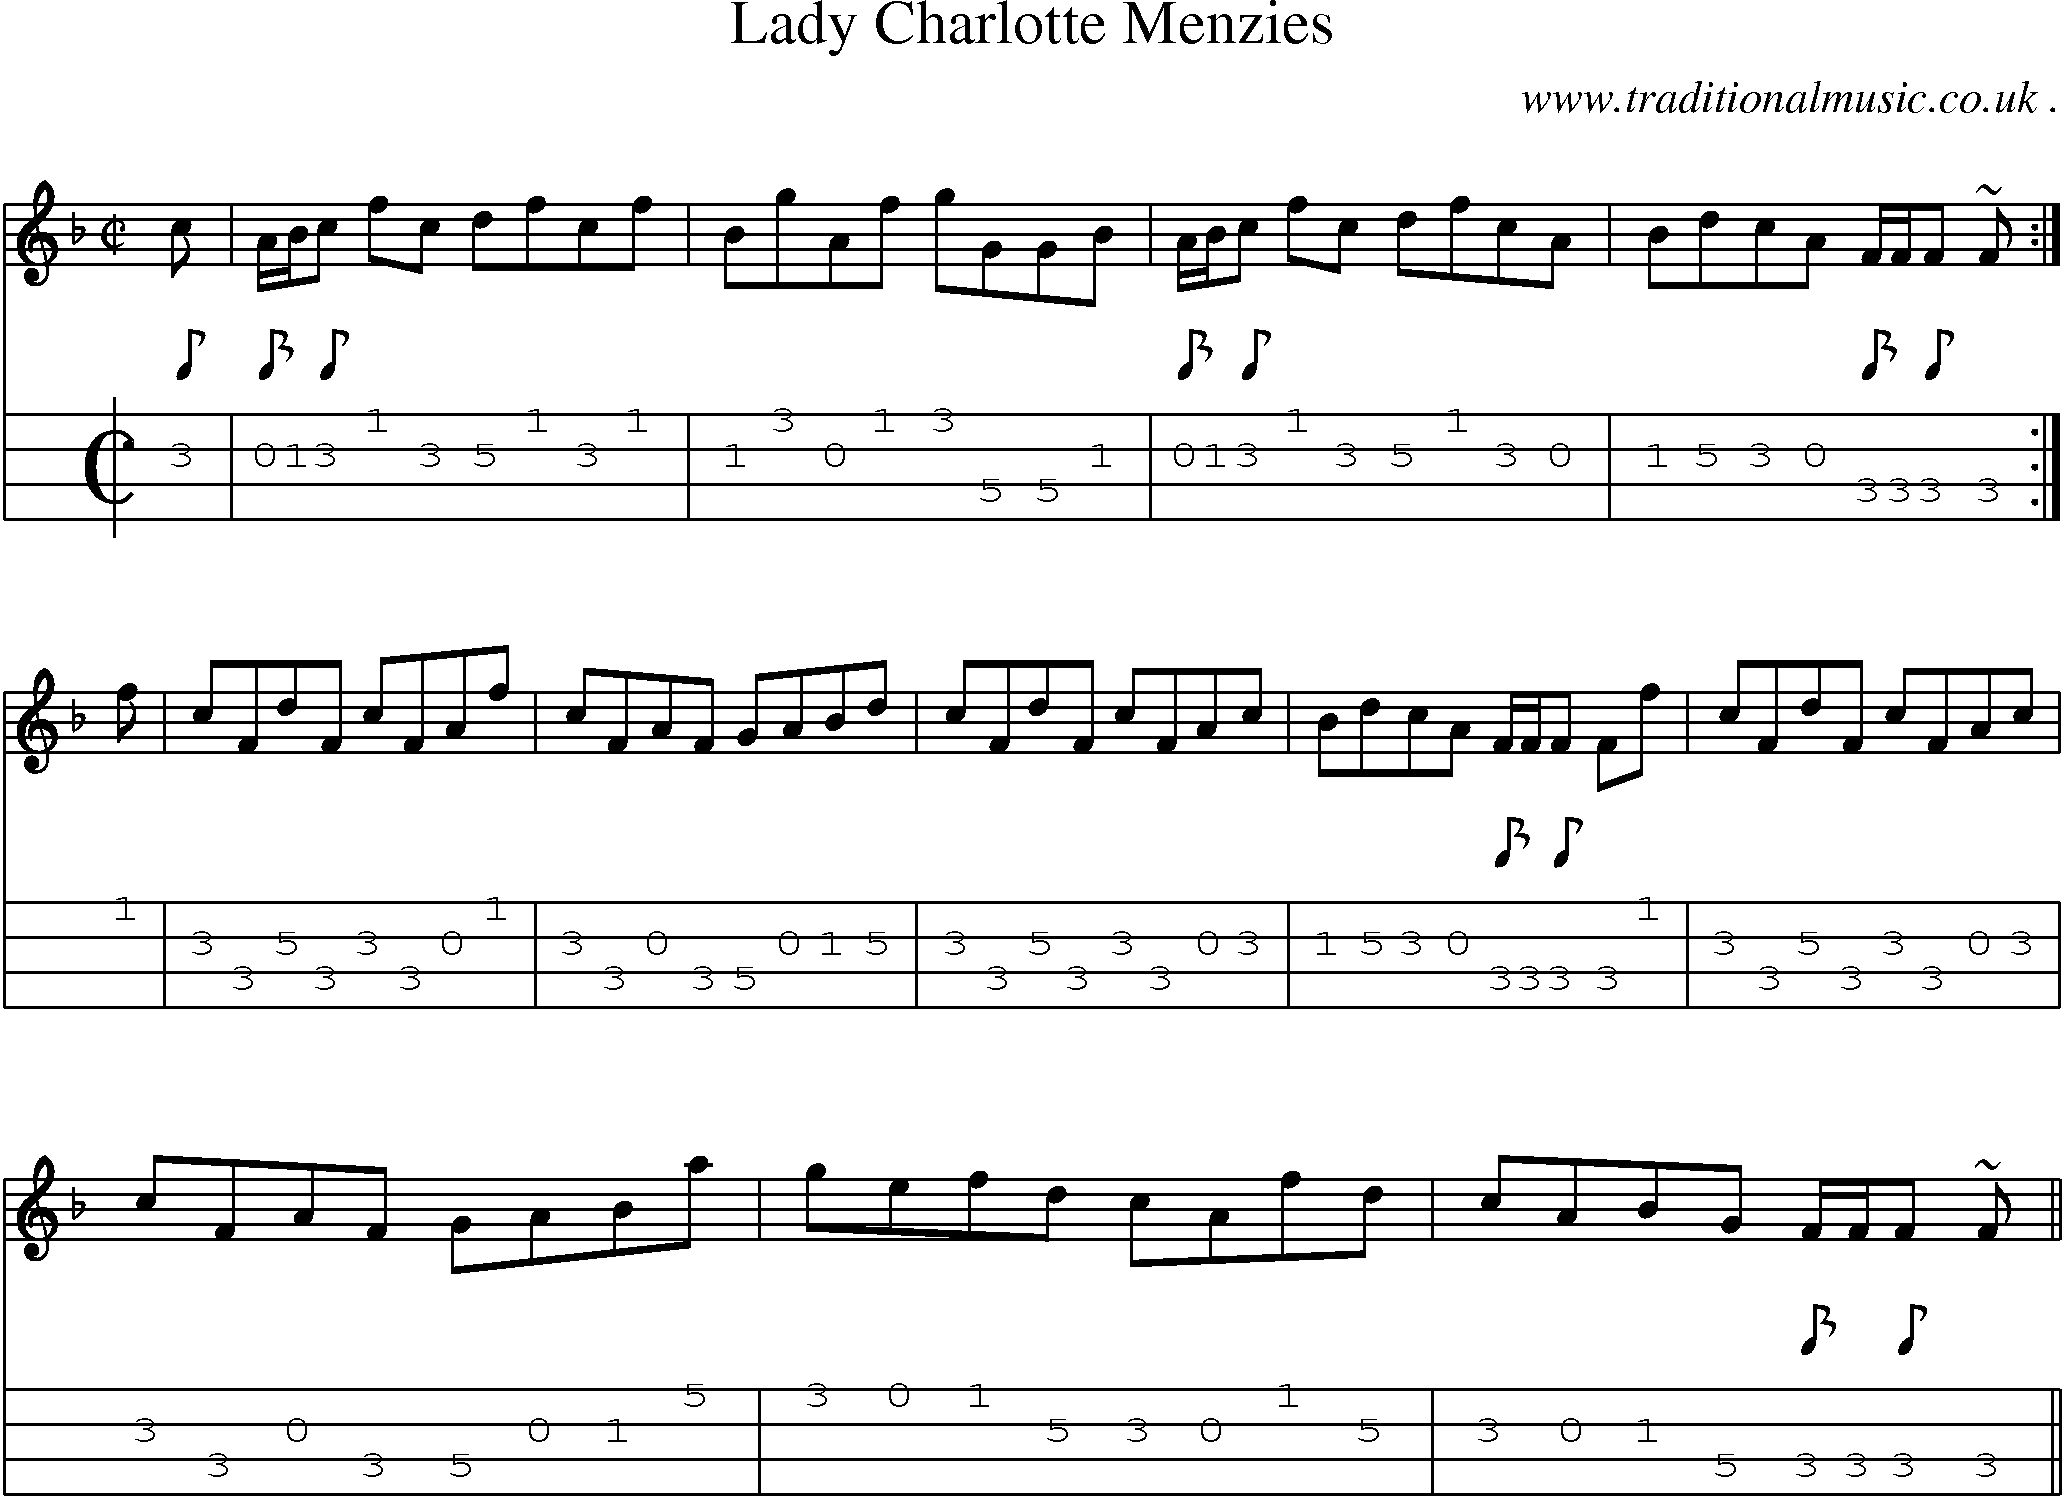 Sheet-music  score, Chords and Mandolin Tabs for Lady Charlotte Menzies